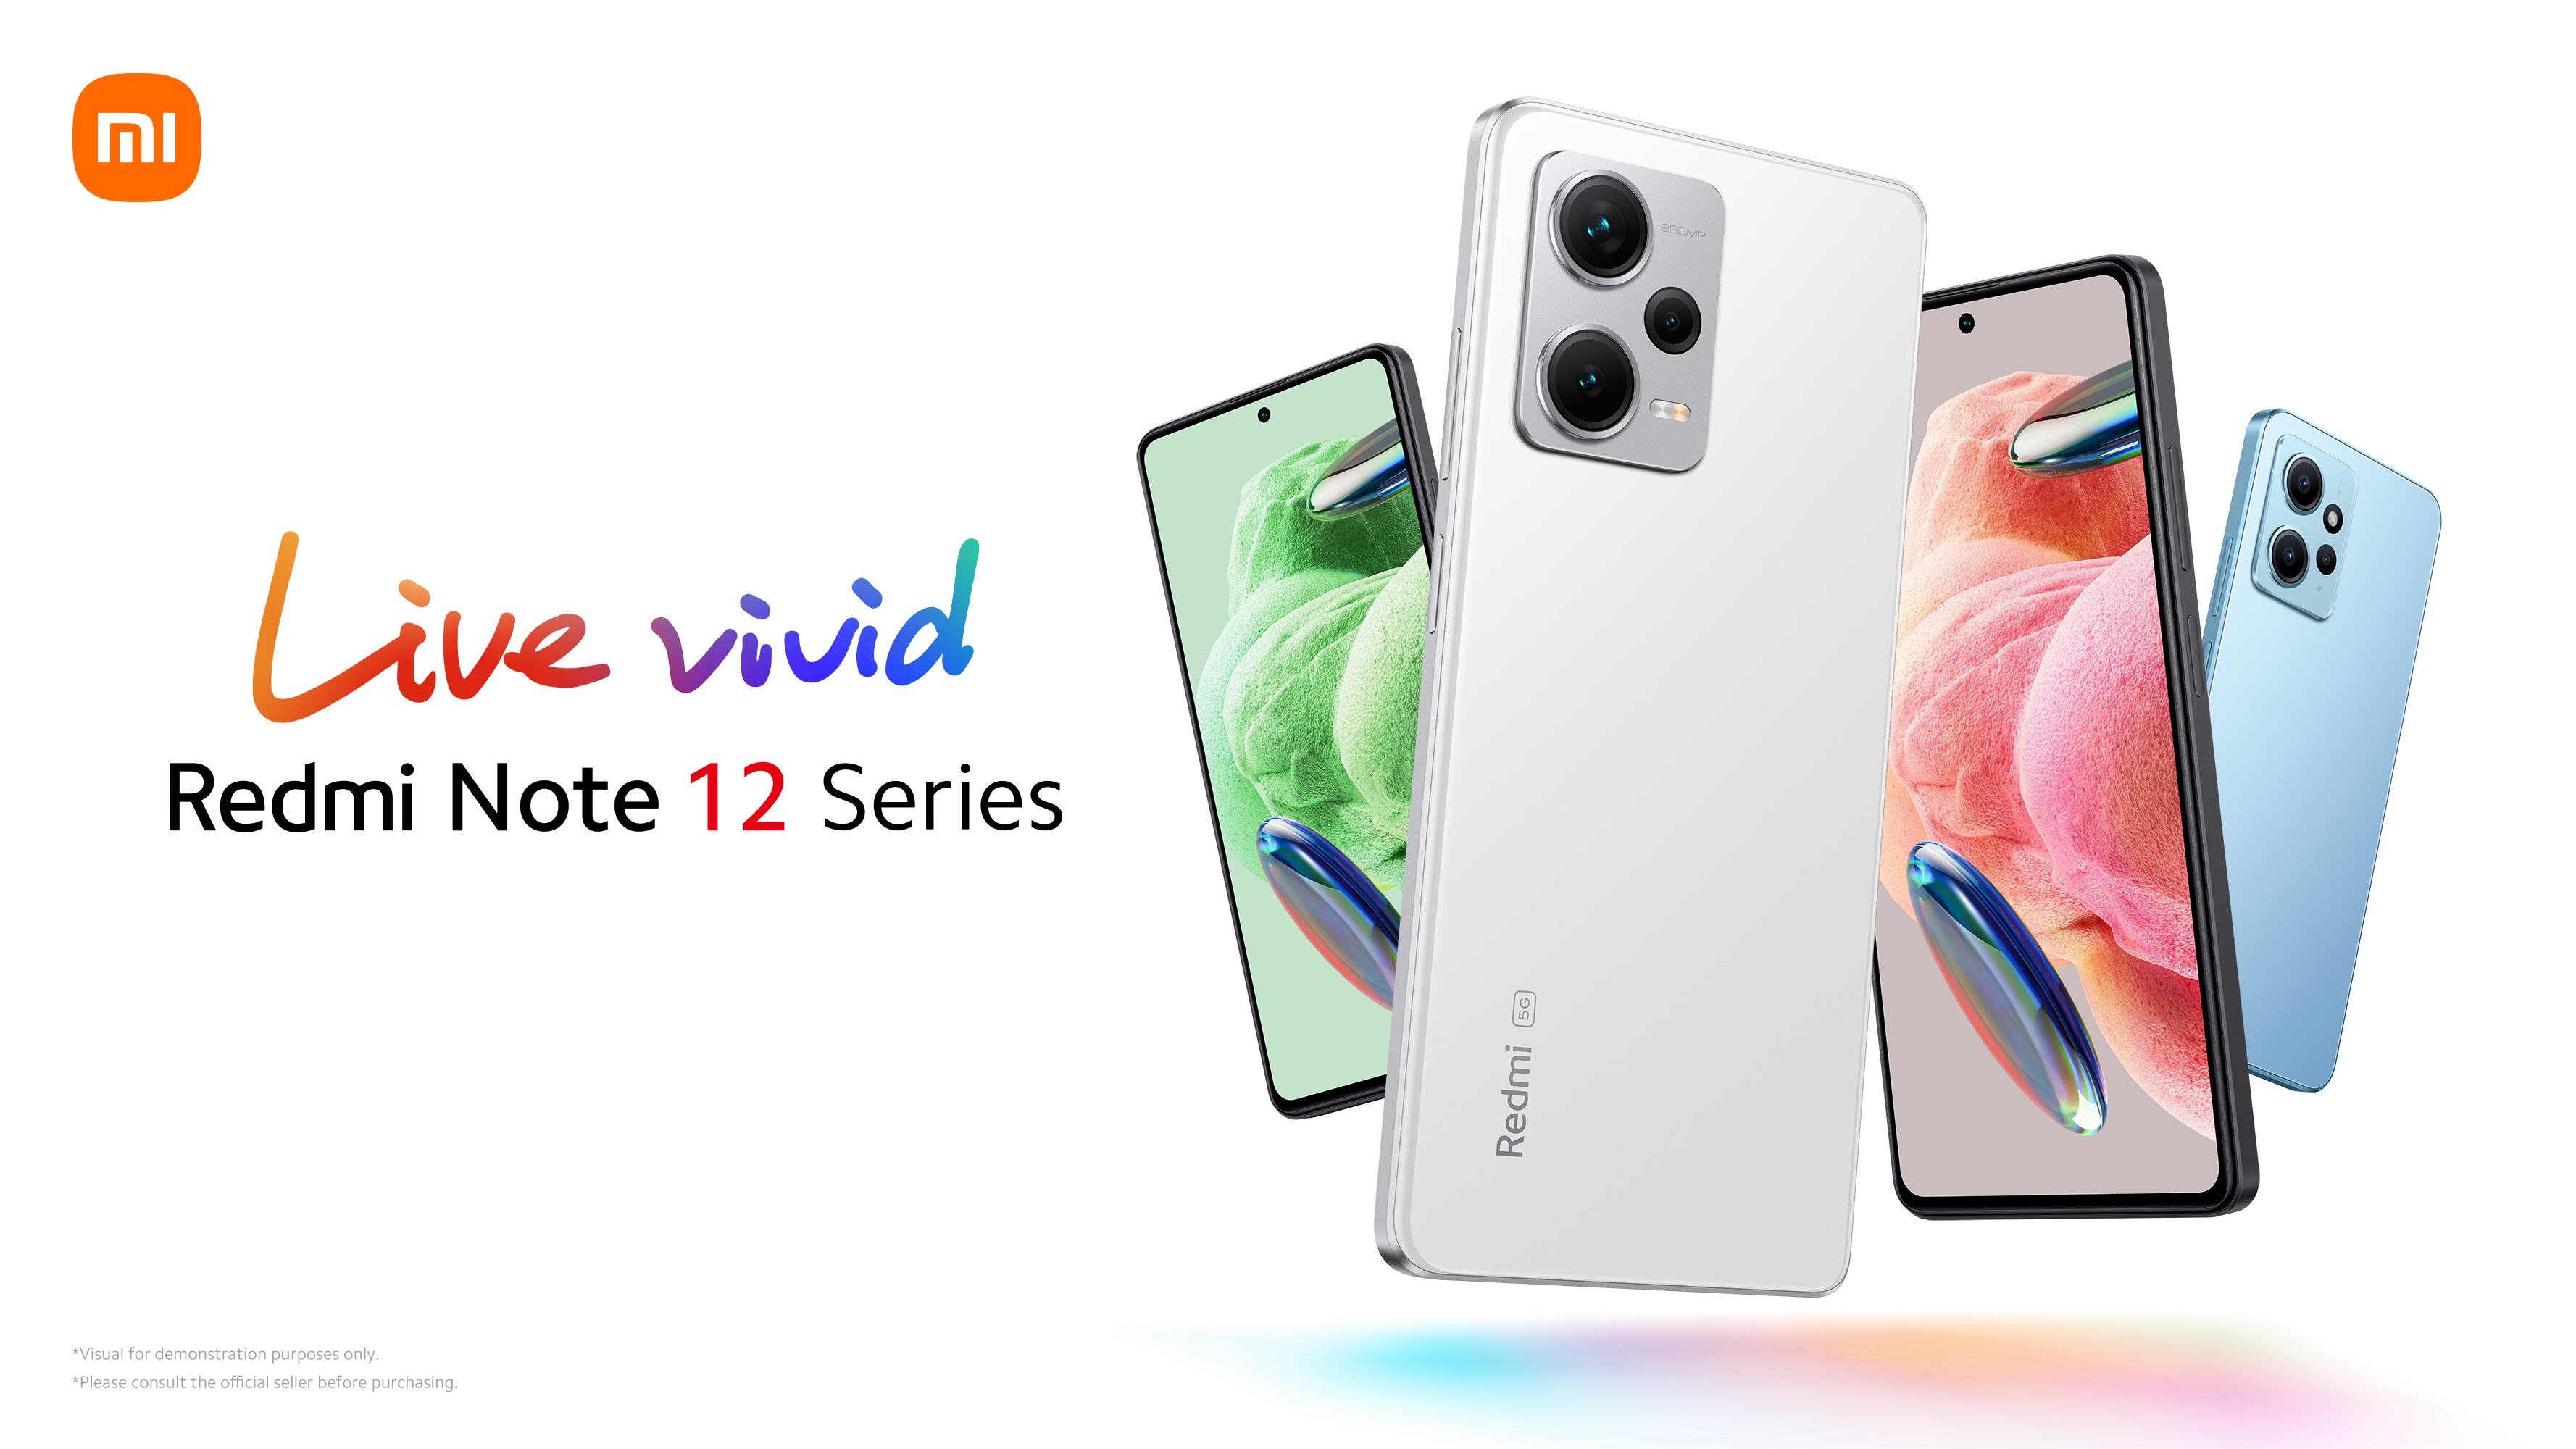 Xiaomi encourage Nigerians to 'Live Vivid' with the Launch of